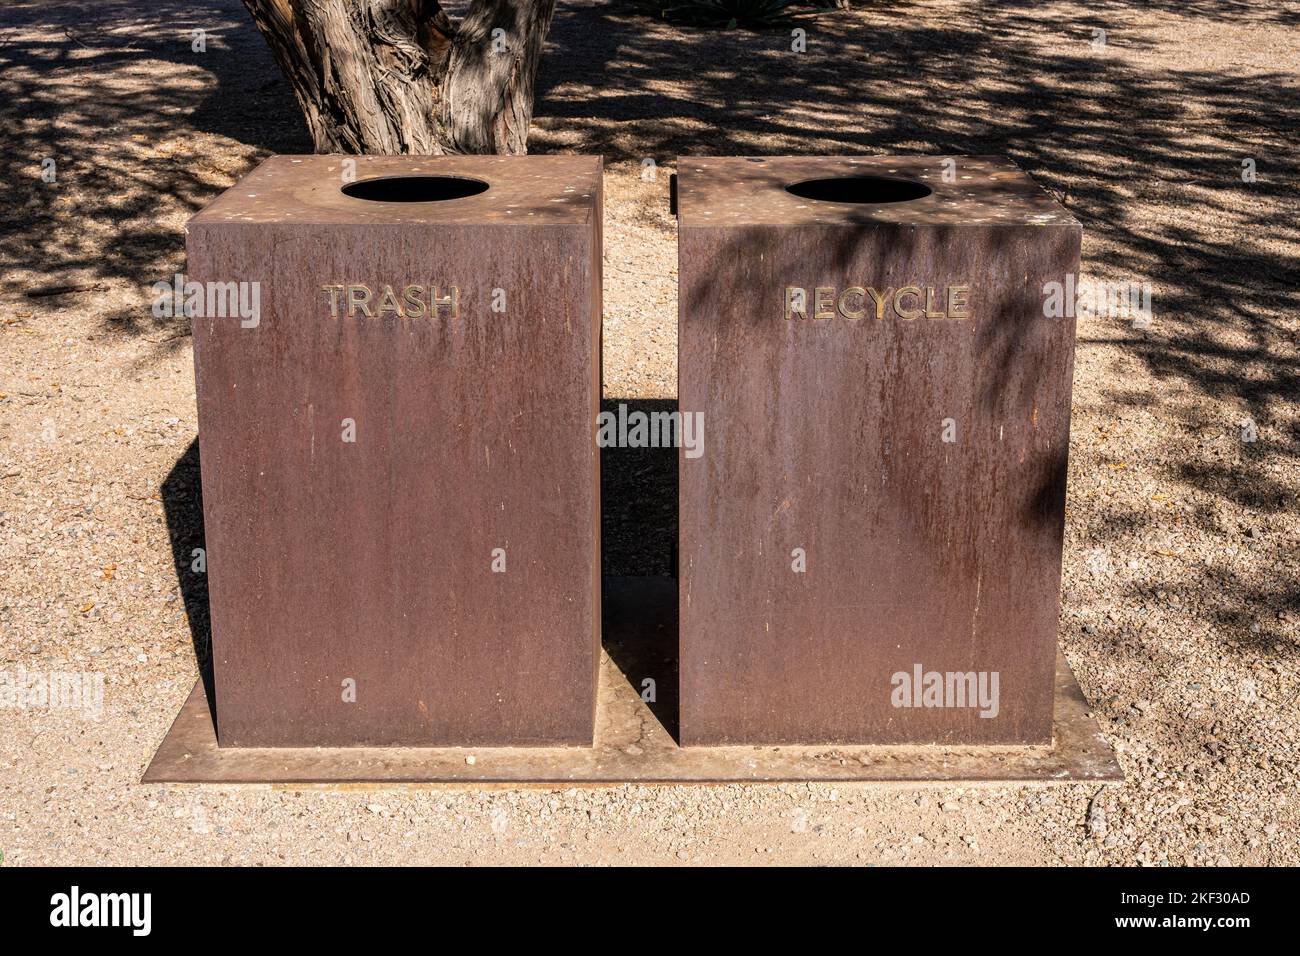 simple rusty metal trash and recycle bins in a southwest United States desert environment Stock Photo